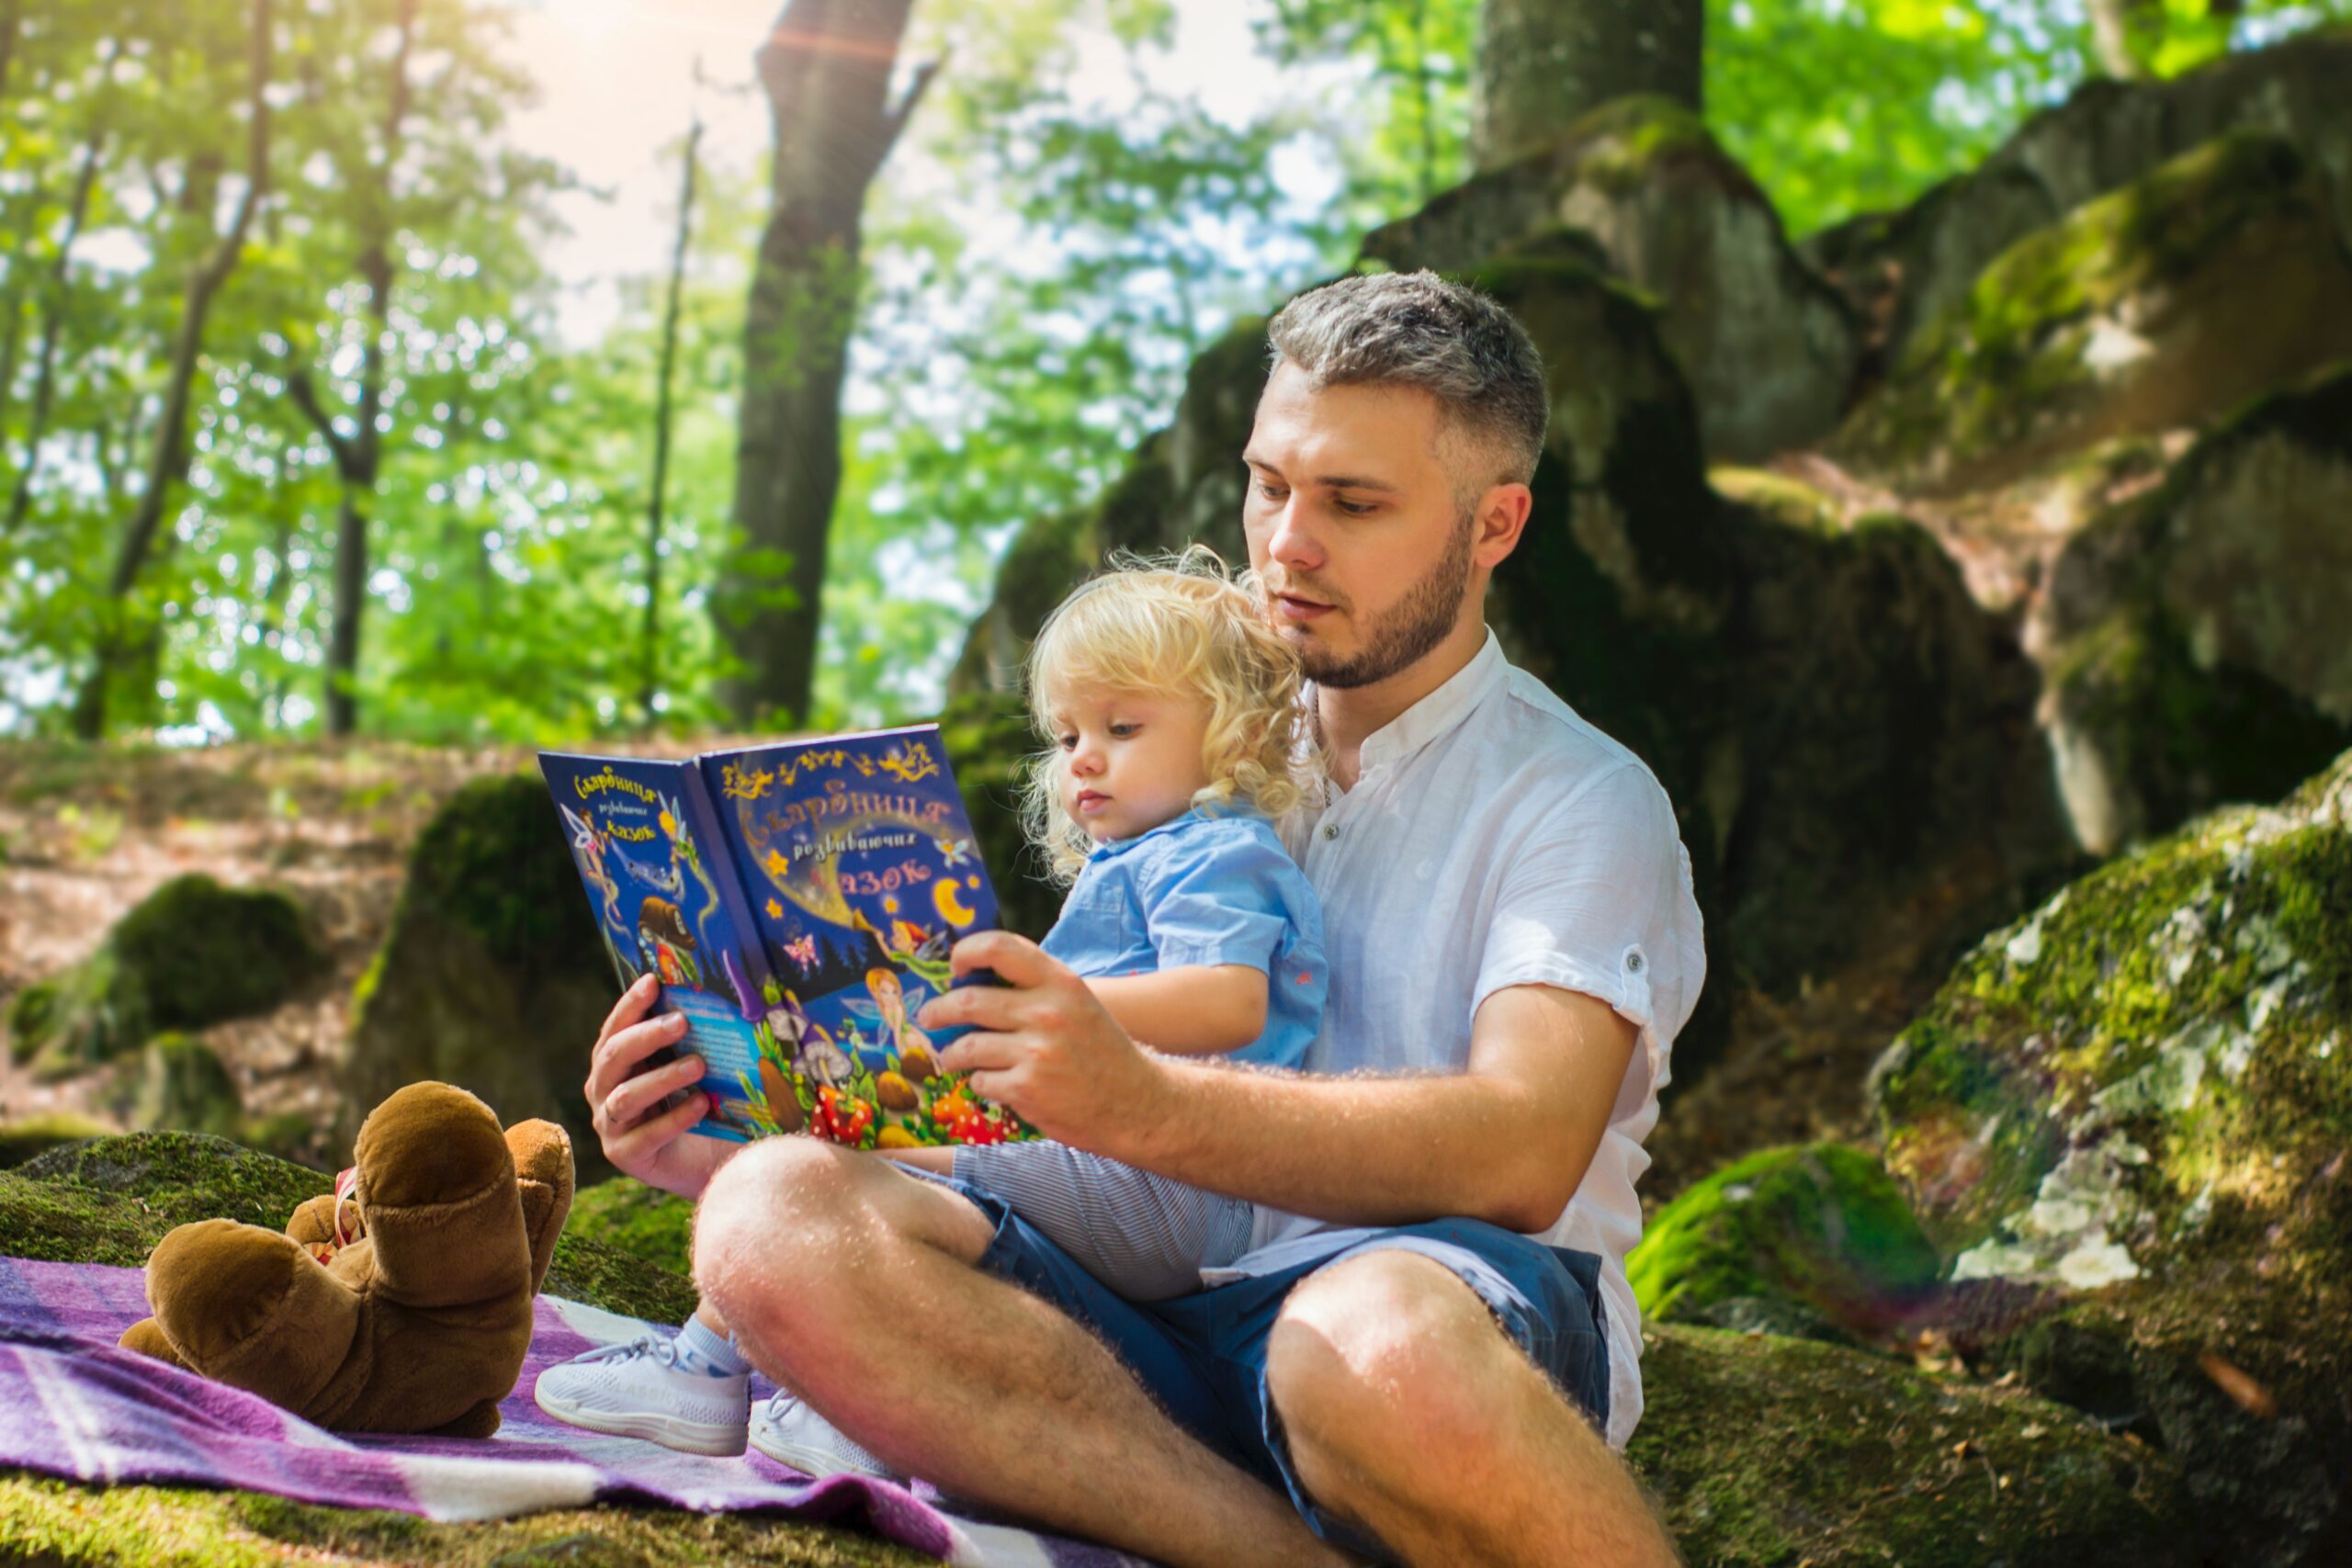 man with book reading to child in his lap outdoors